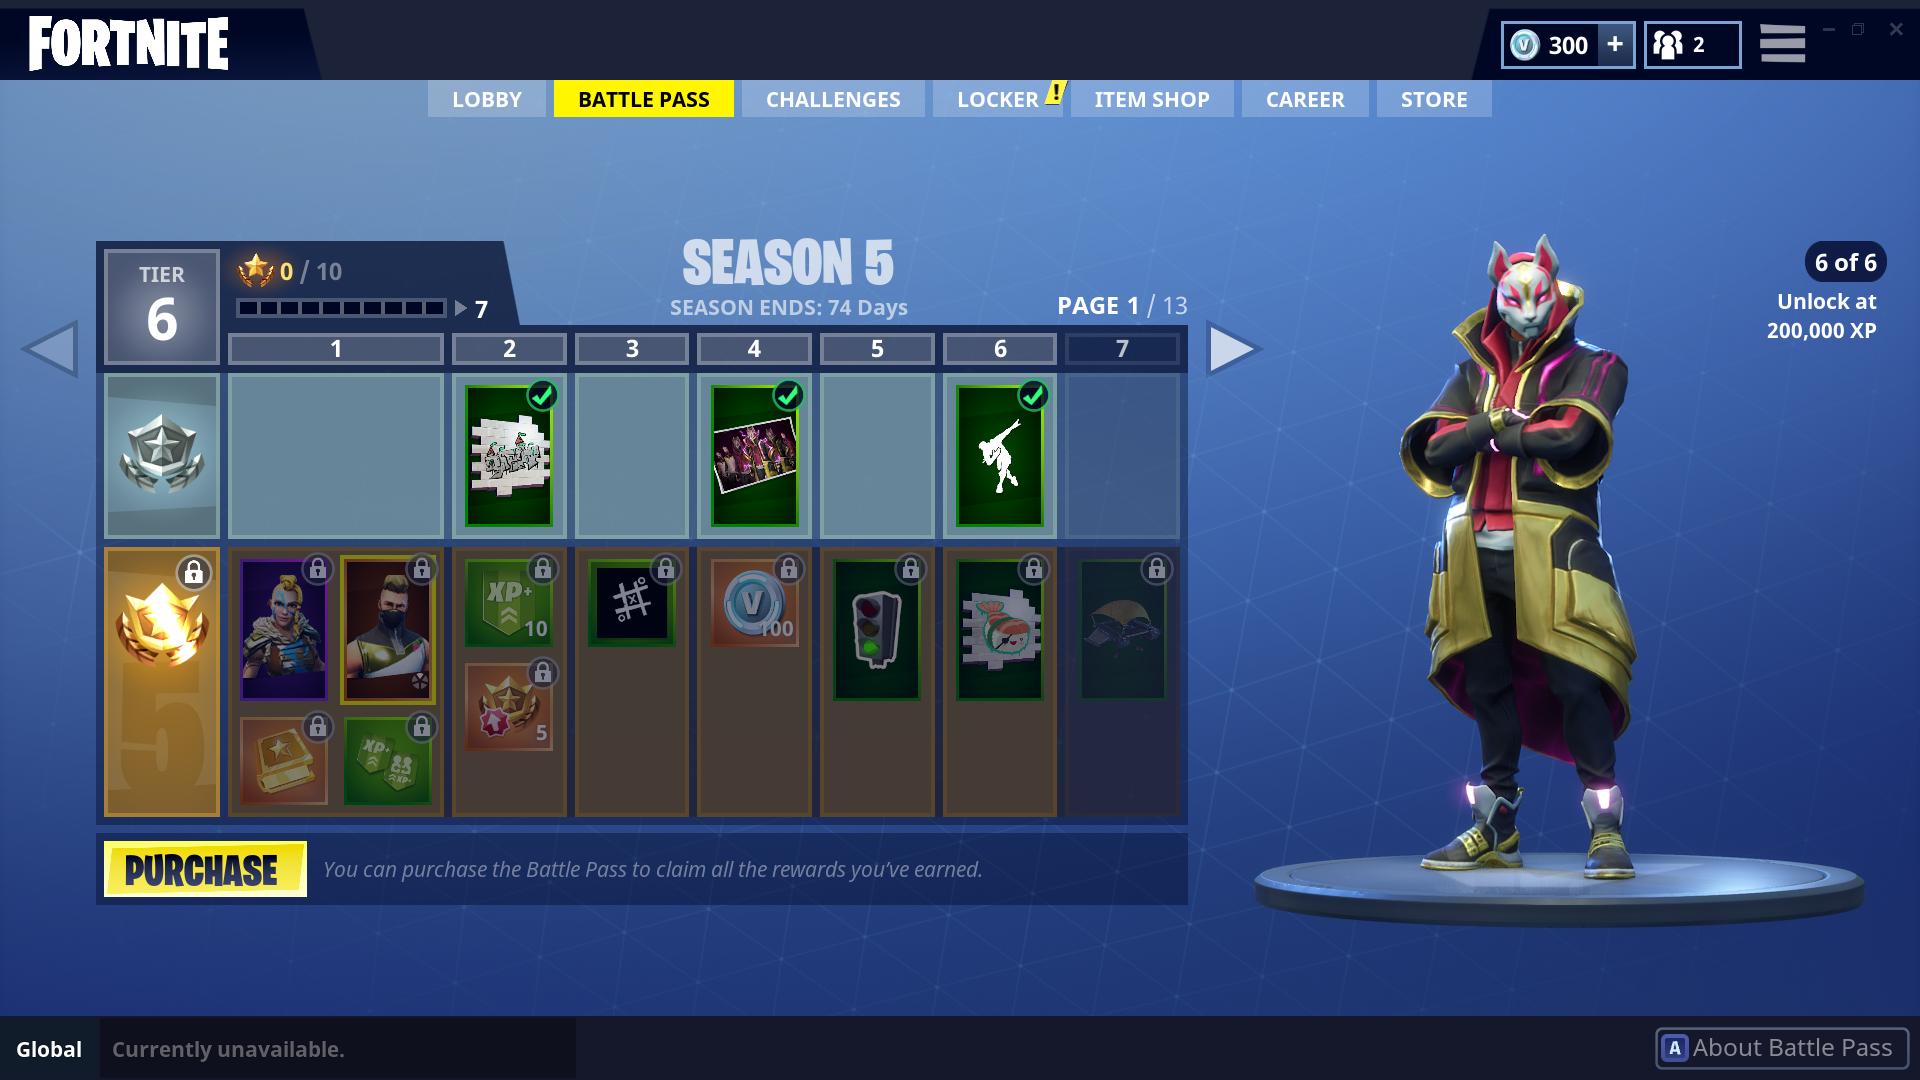 Fortnite Season 5 Battle Pass Outfits And Rewards News Prima Games - the drift outfit in fortnite is the tier 1 legendary skin of the season 5 battle pass it is a progressive outfit which means it has multiple styles that